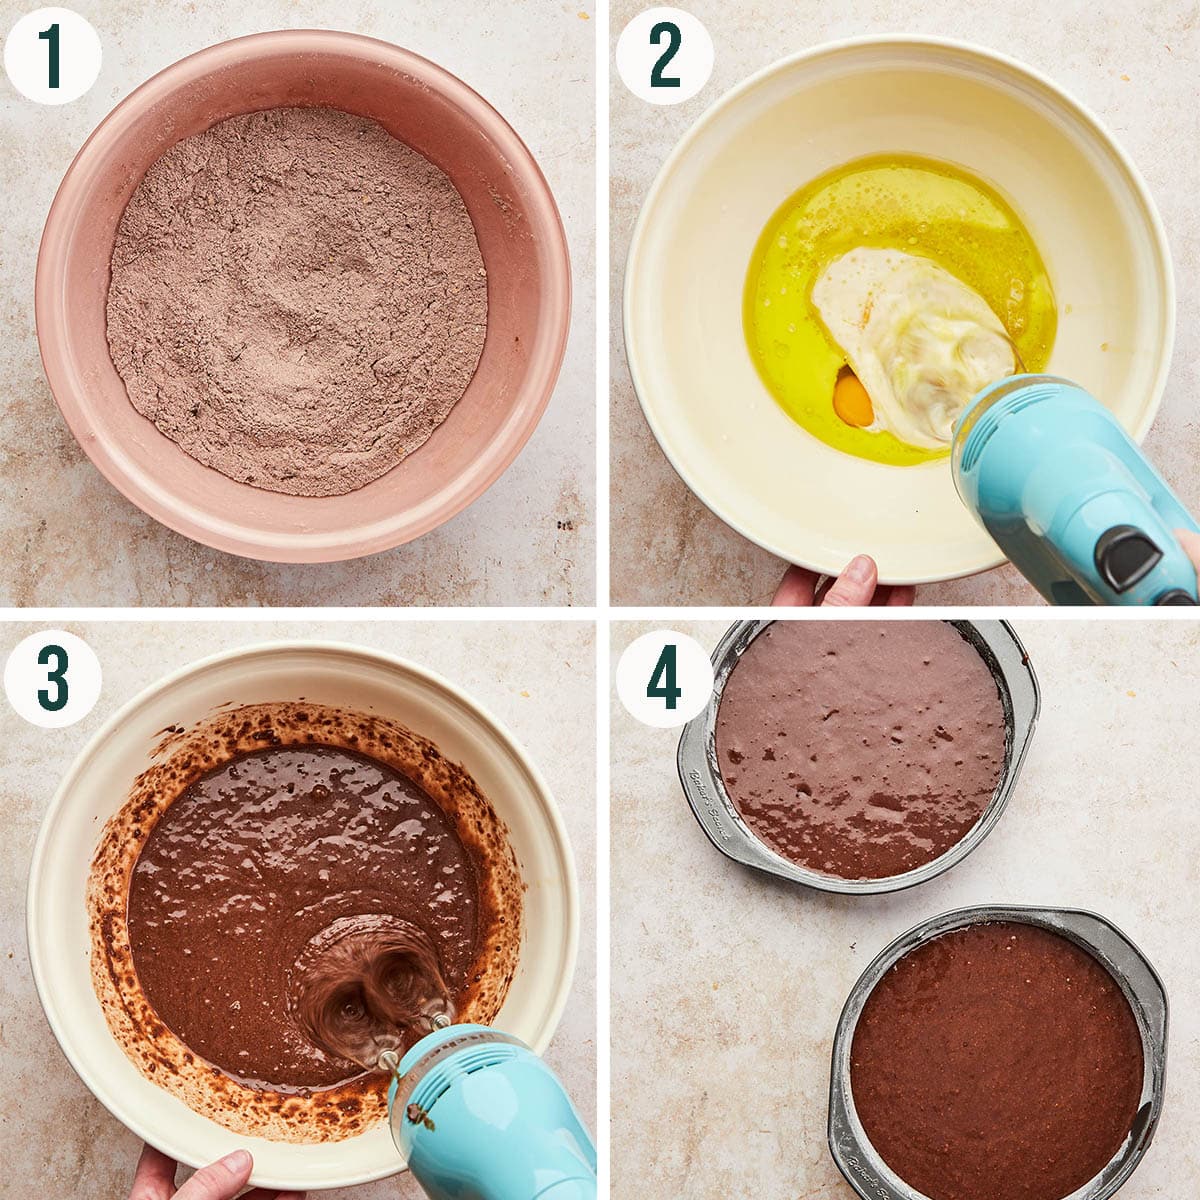 Chocolate cake steps 1 to 4, making the batter.